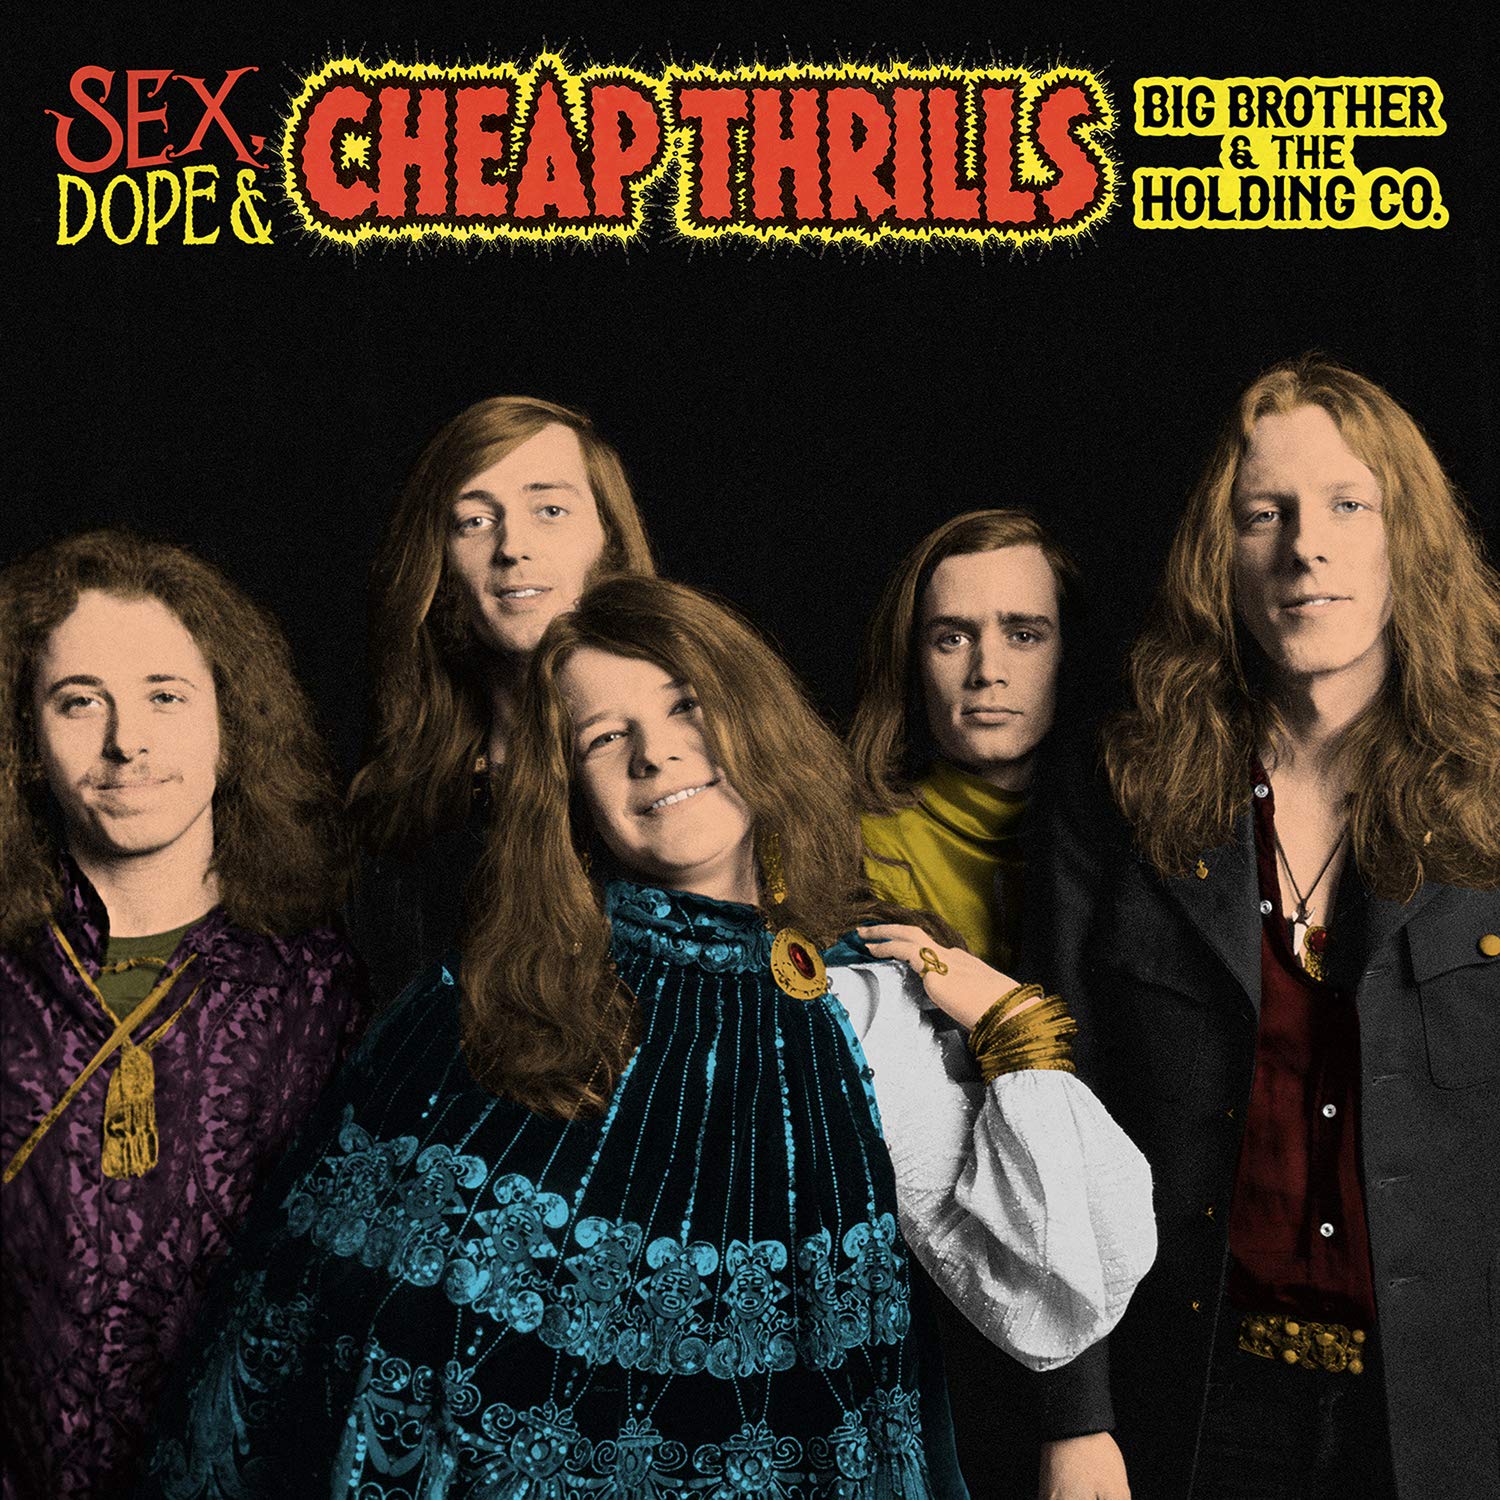 BIG BROTHER & THE HOLDING CO. – Sex, Dope & Cheap Thrills